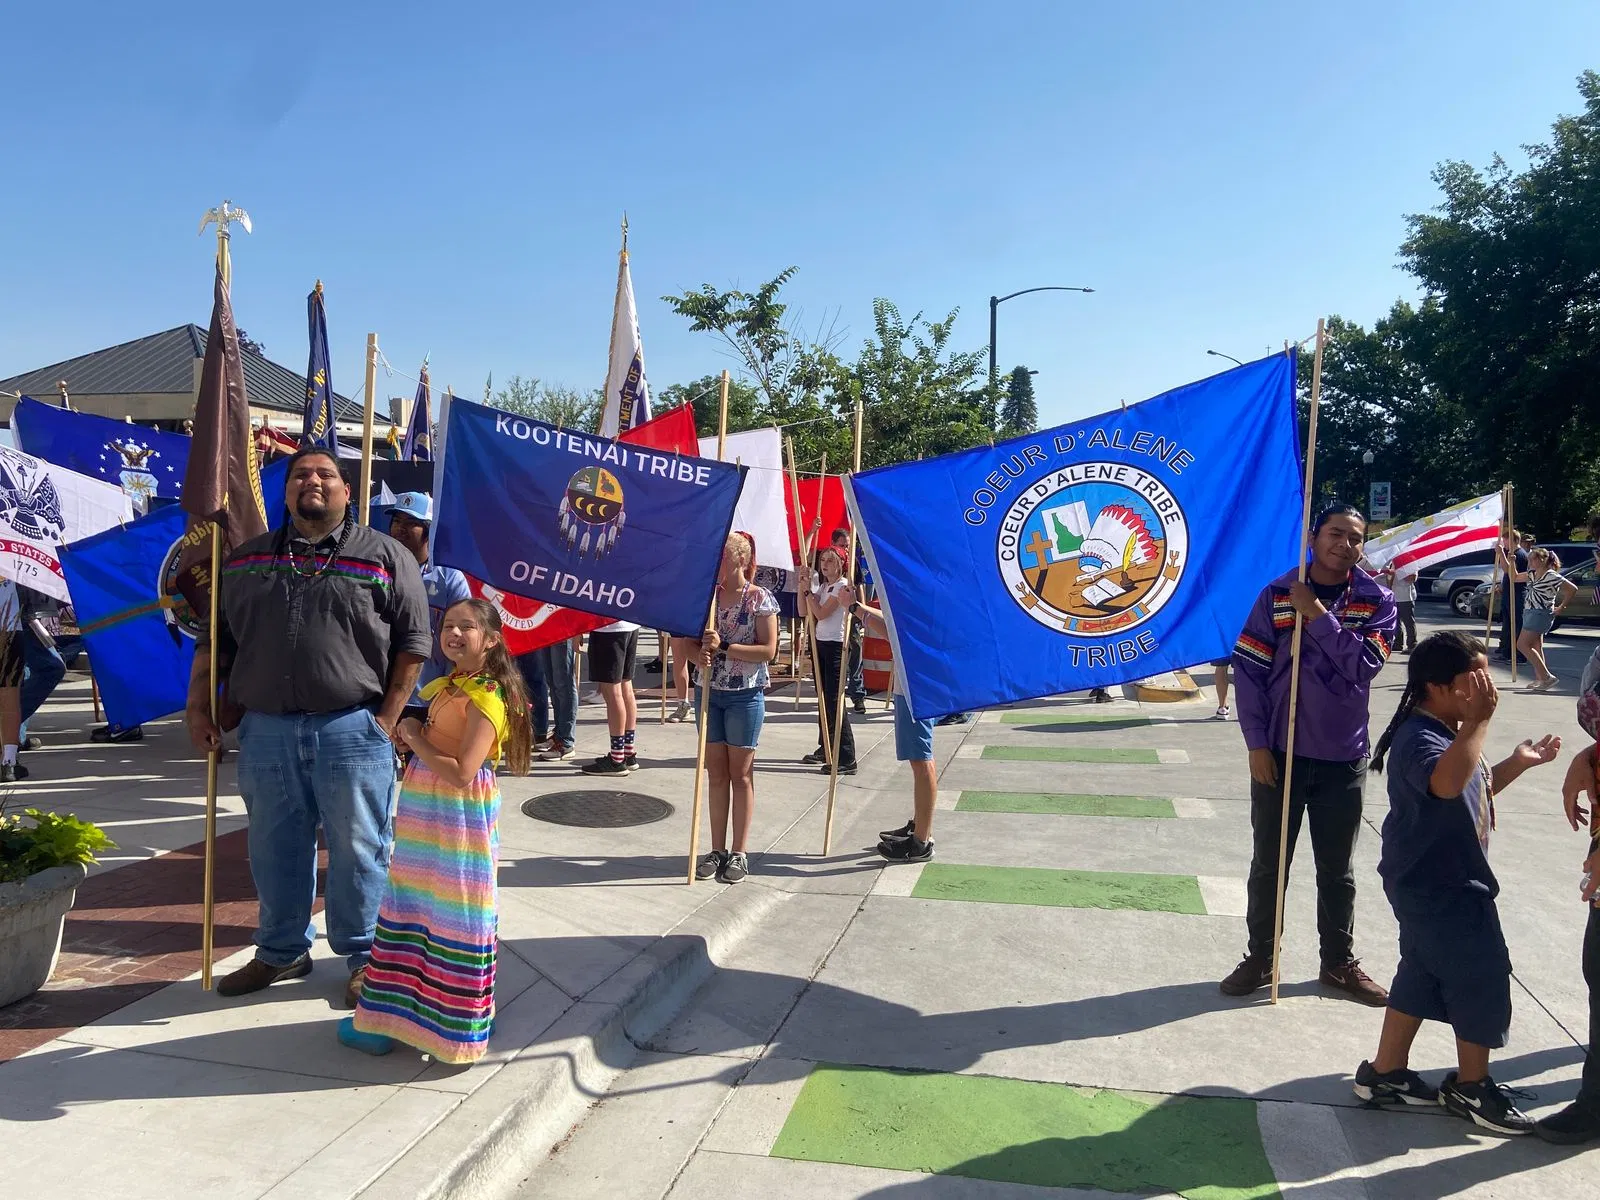 Idaho confederated tribe members walking with native american tribe flags.